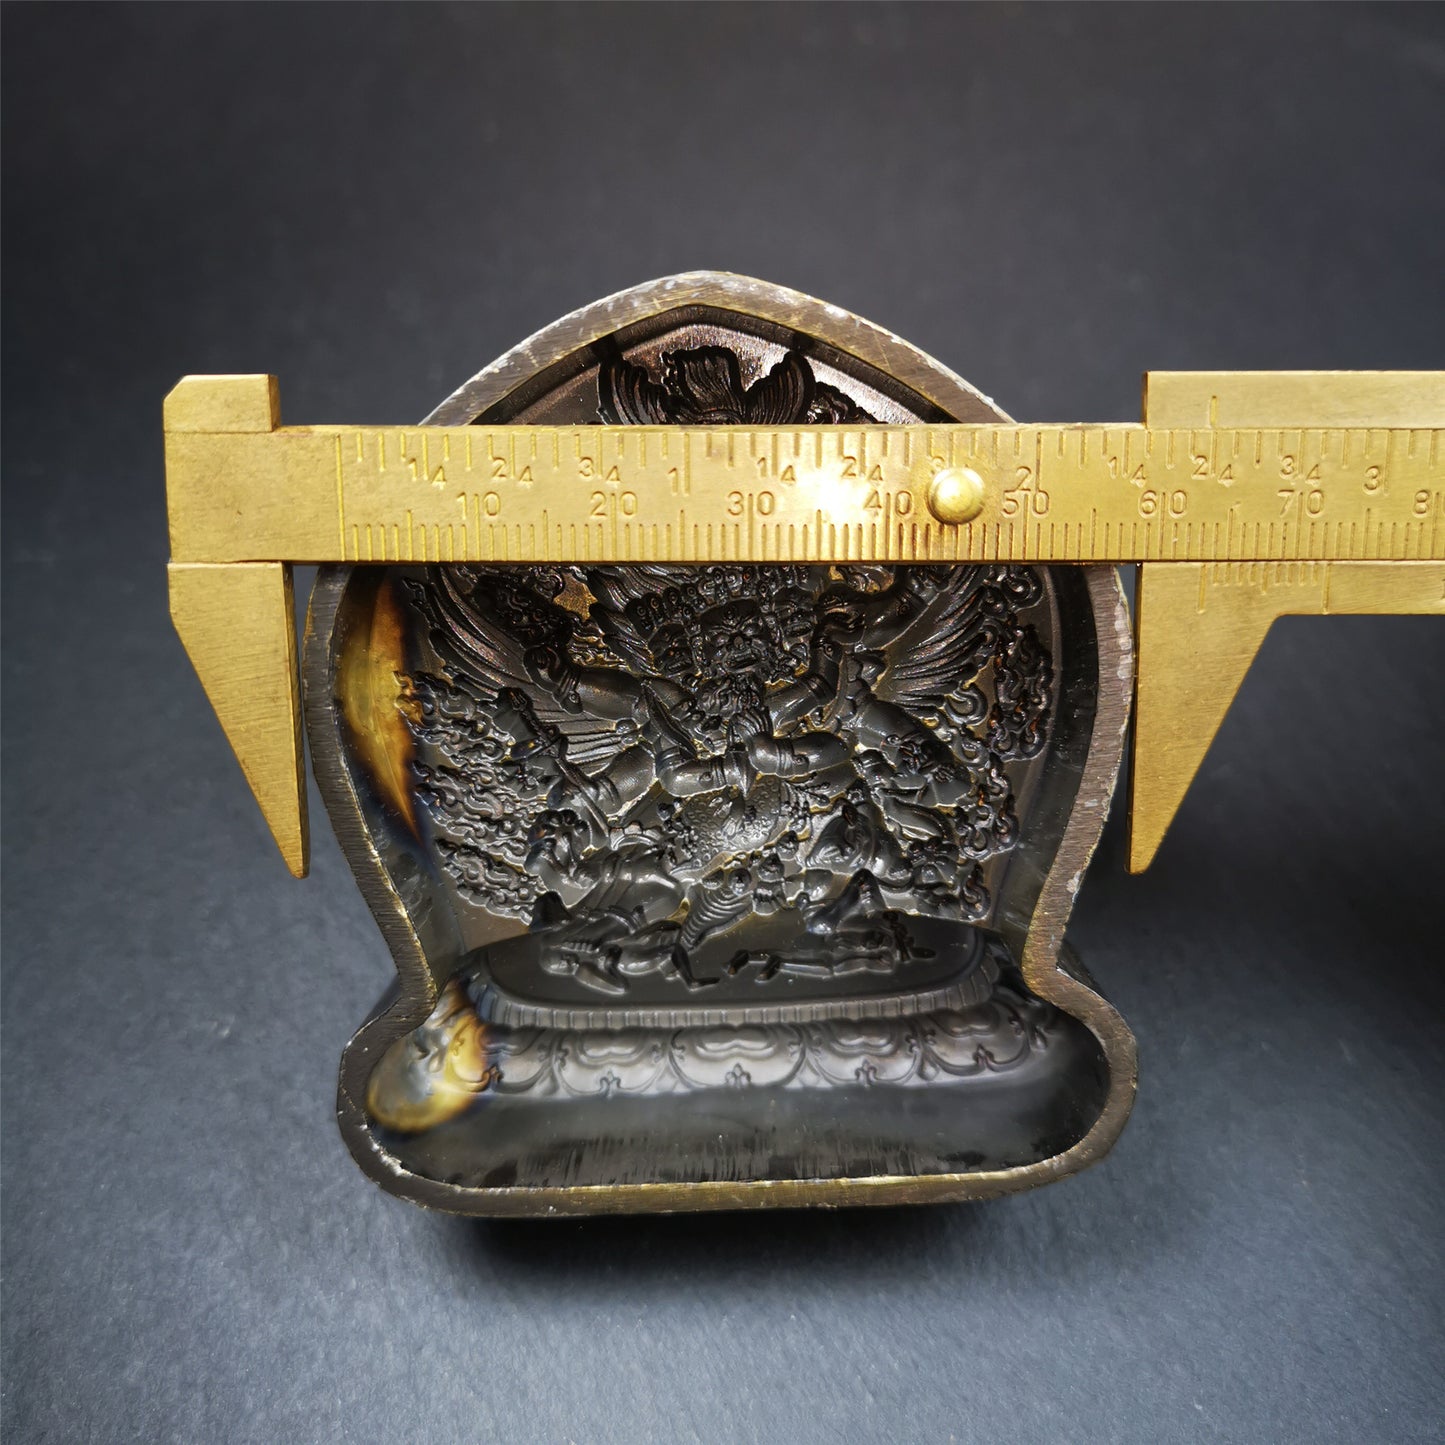 This Vajrakilaya Tsa-Tsa is made by Tibetan craftsmen in Hepo Town, Baiyu County. It is made of brass,yellow color,the shaple is Vajrakilaya,about 2.8inches height. With this mold, you can use clay to make your own Buddha statue.